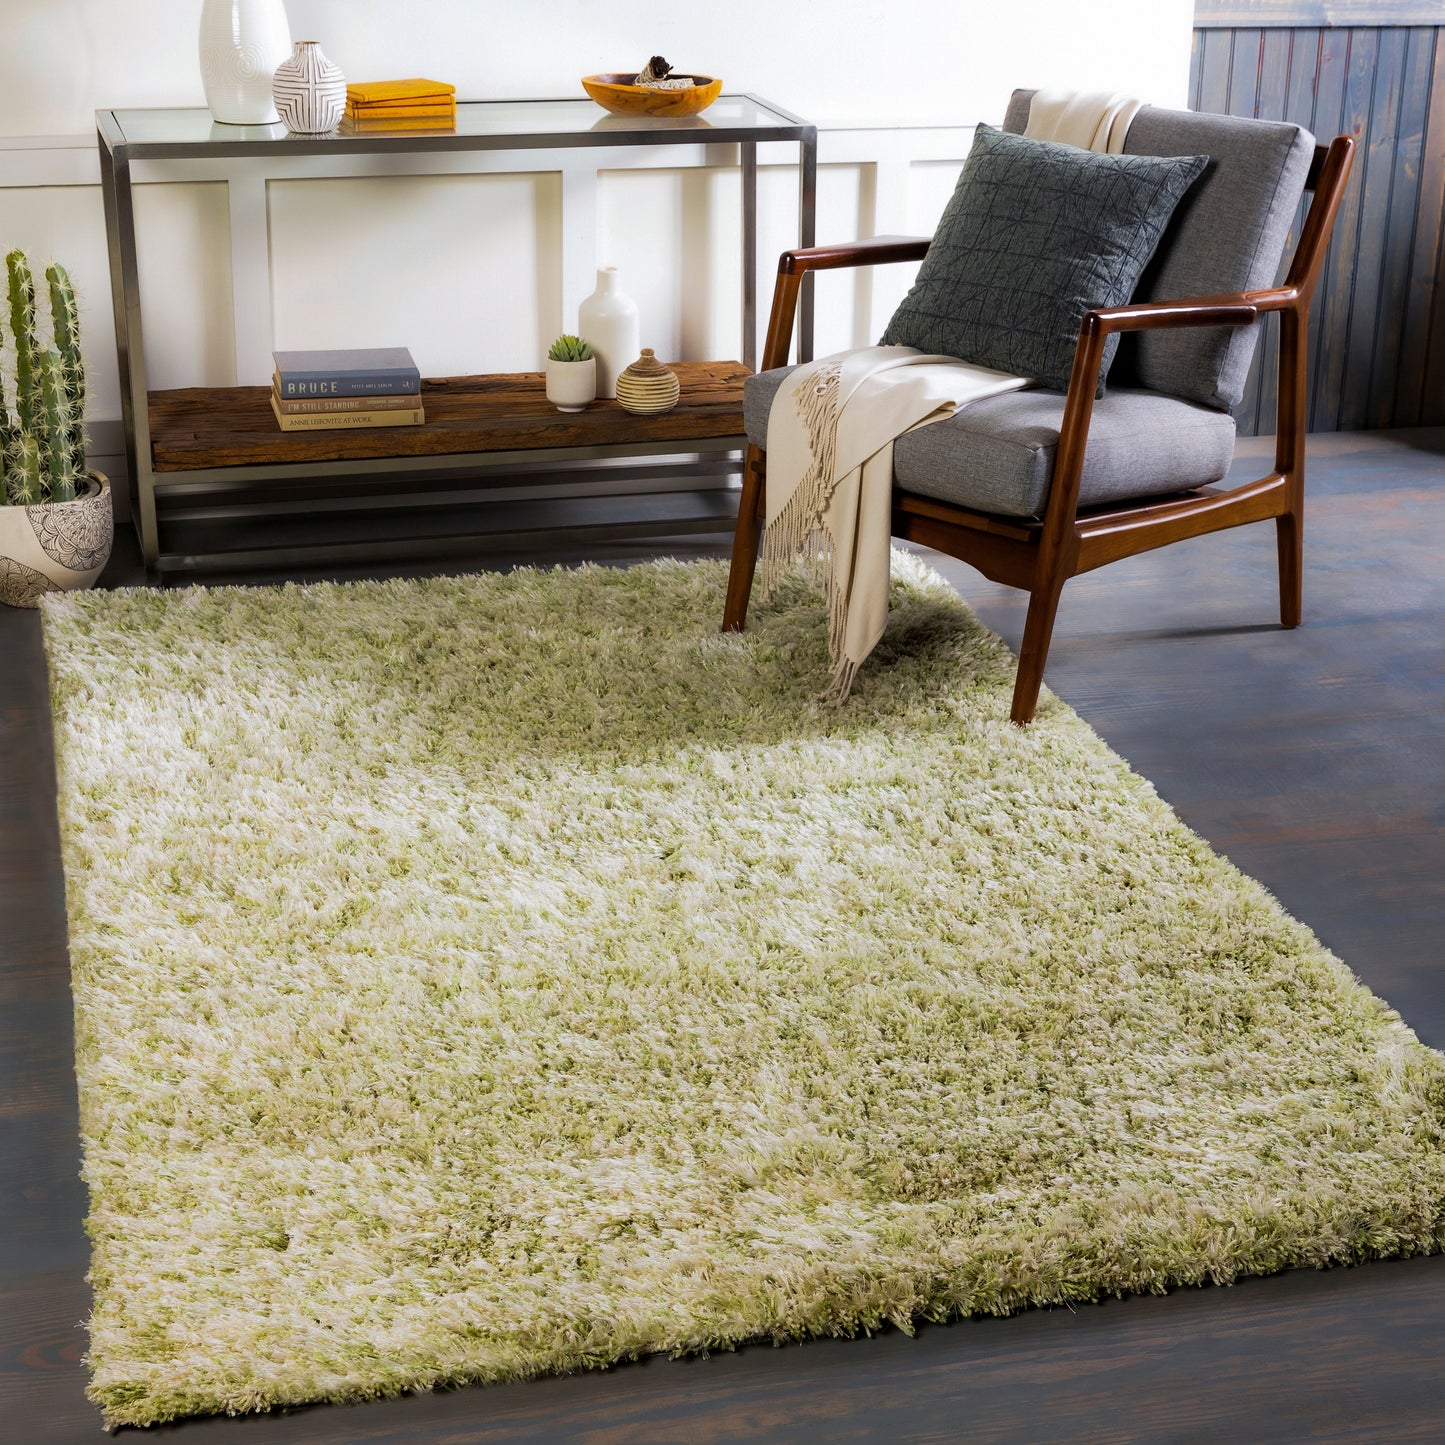 Anaheim 29554 Hand Woven Synthetic Blend Indoor Area Rug by Surya Rugs